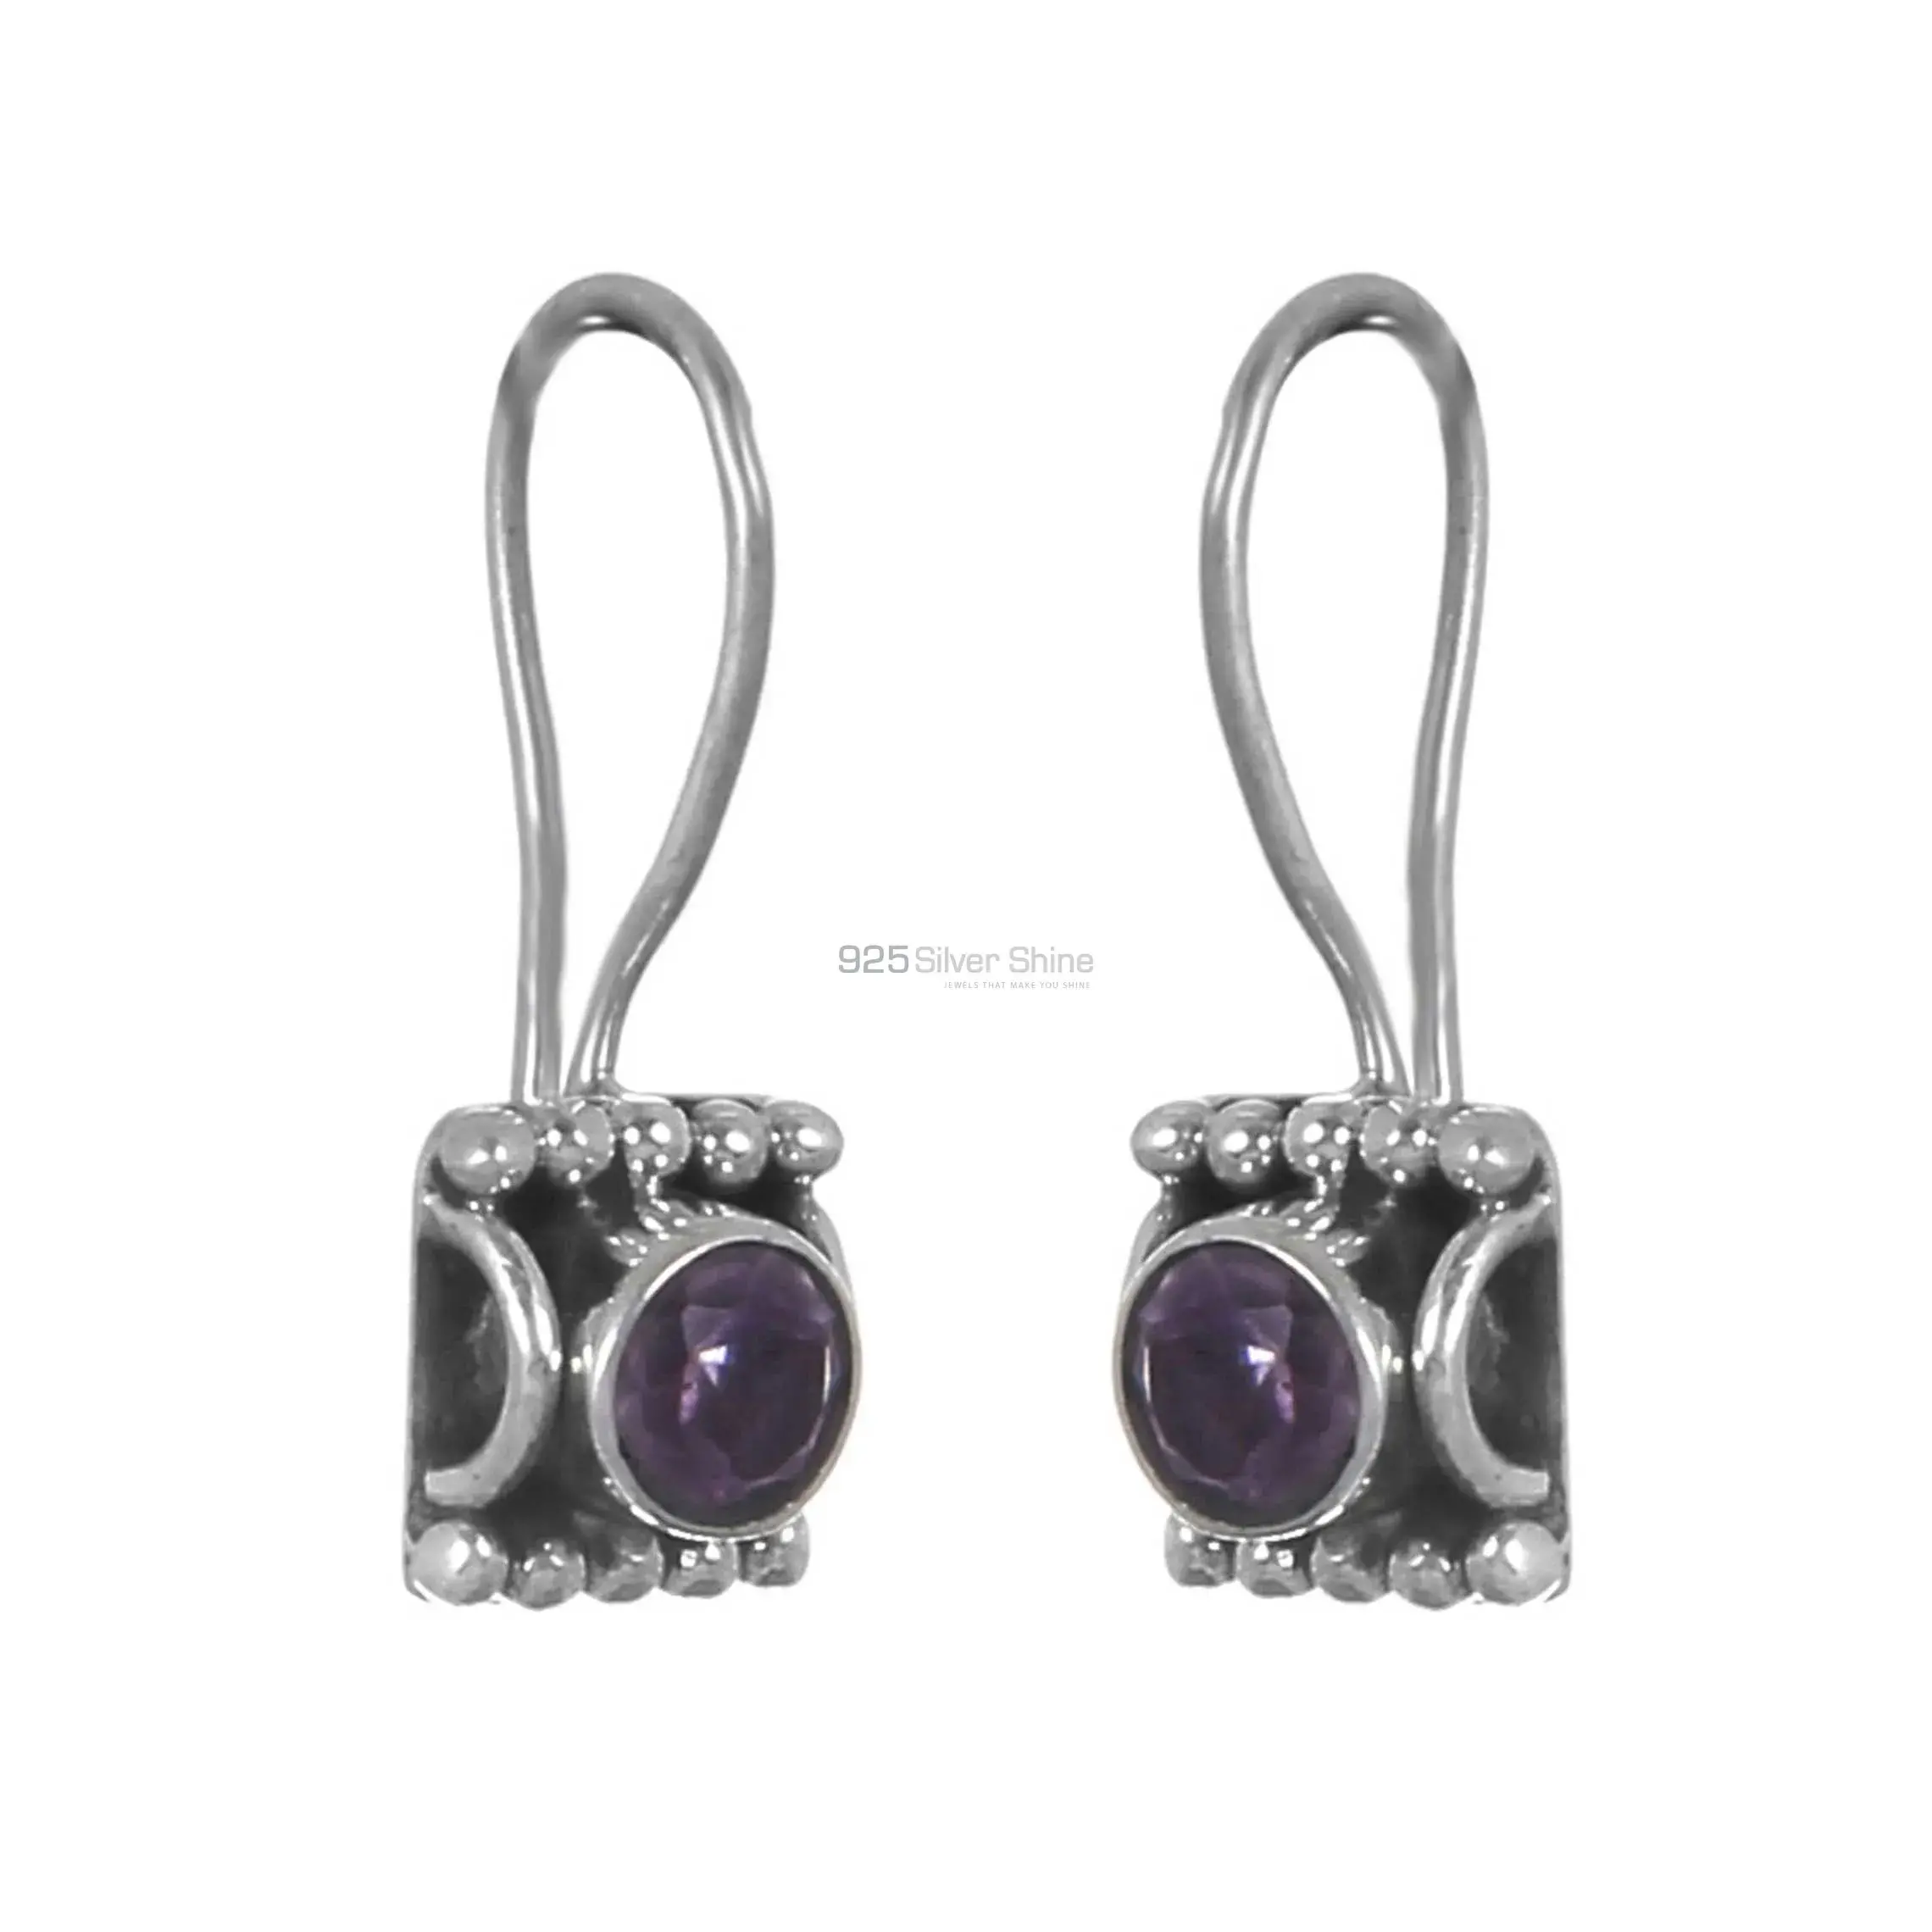 Faceted Amethyst Gemstone In Sterling Silver Jewelry 925SE211_0